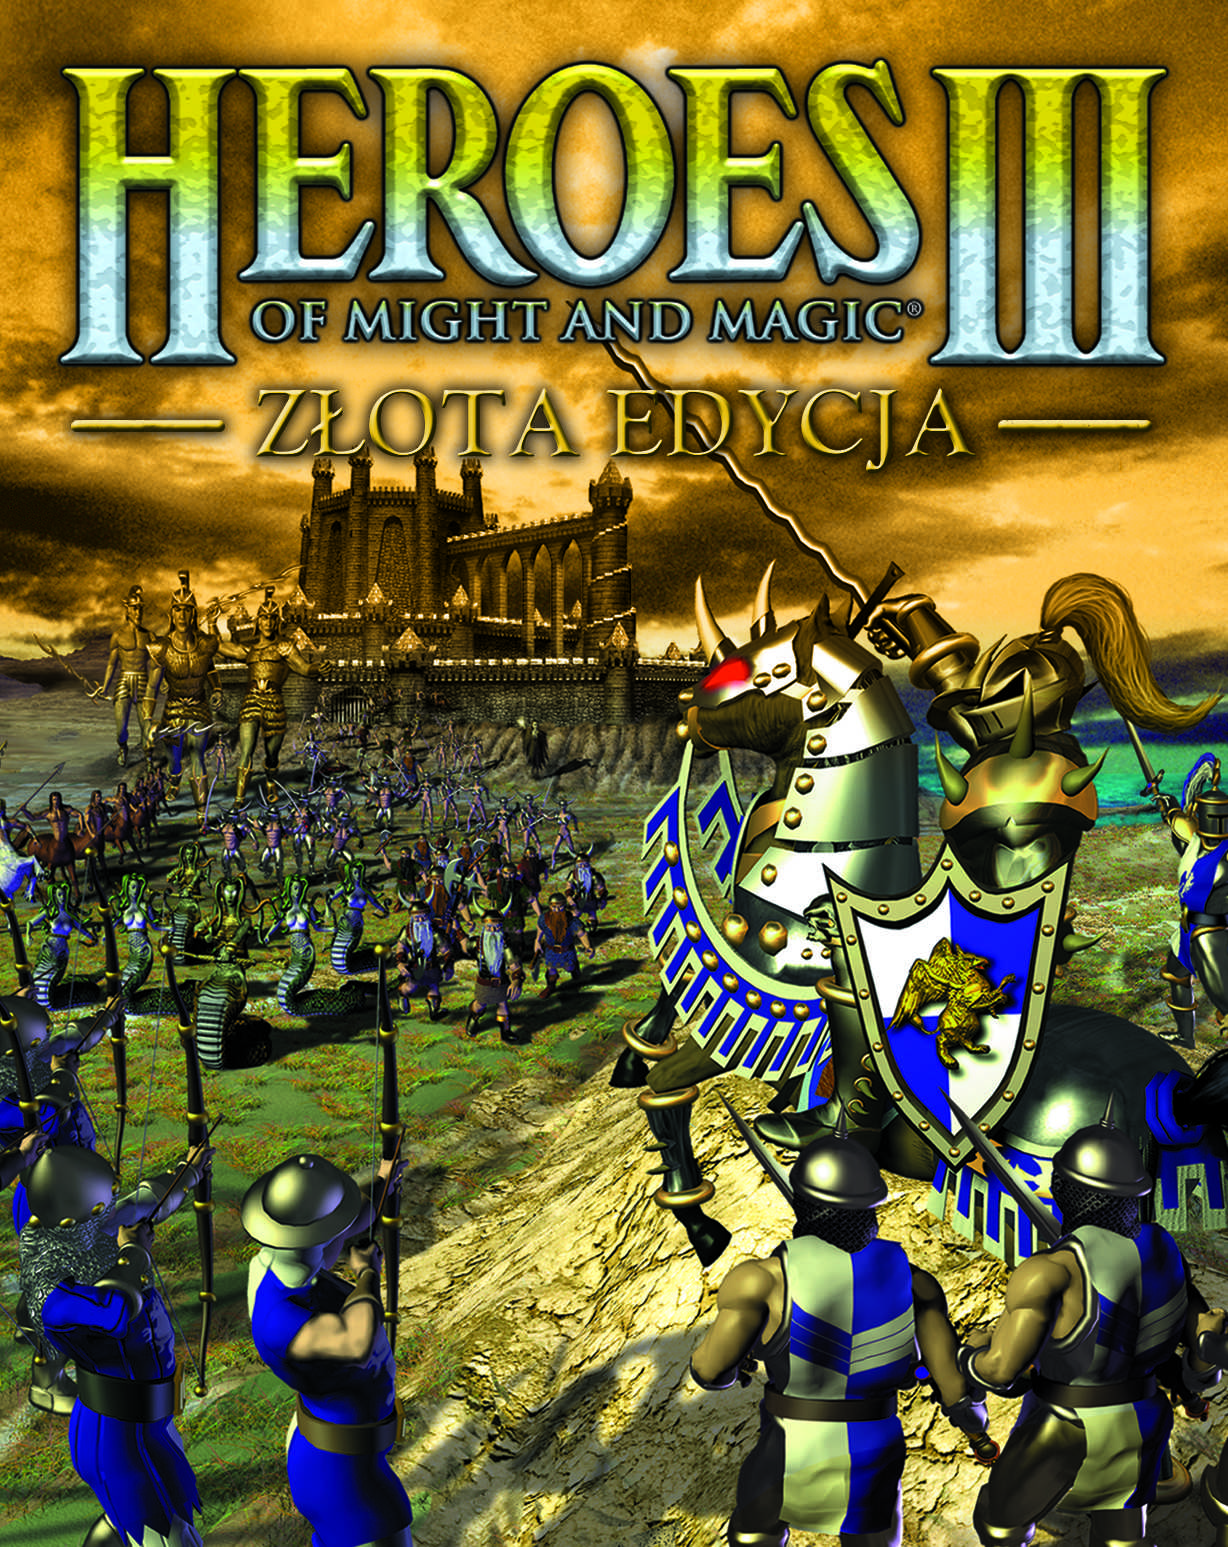 Heroes of the might and magic 3 steam фото 103